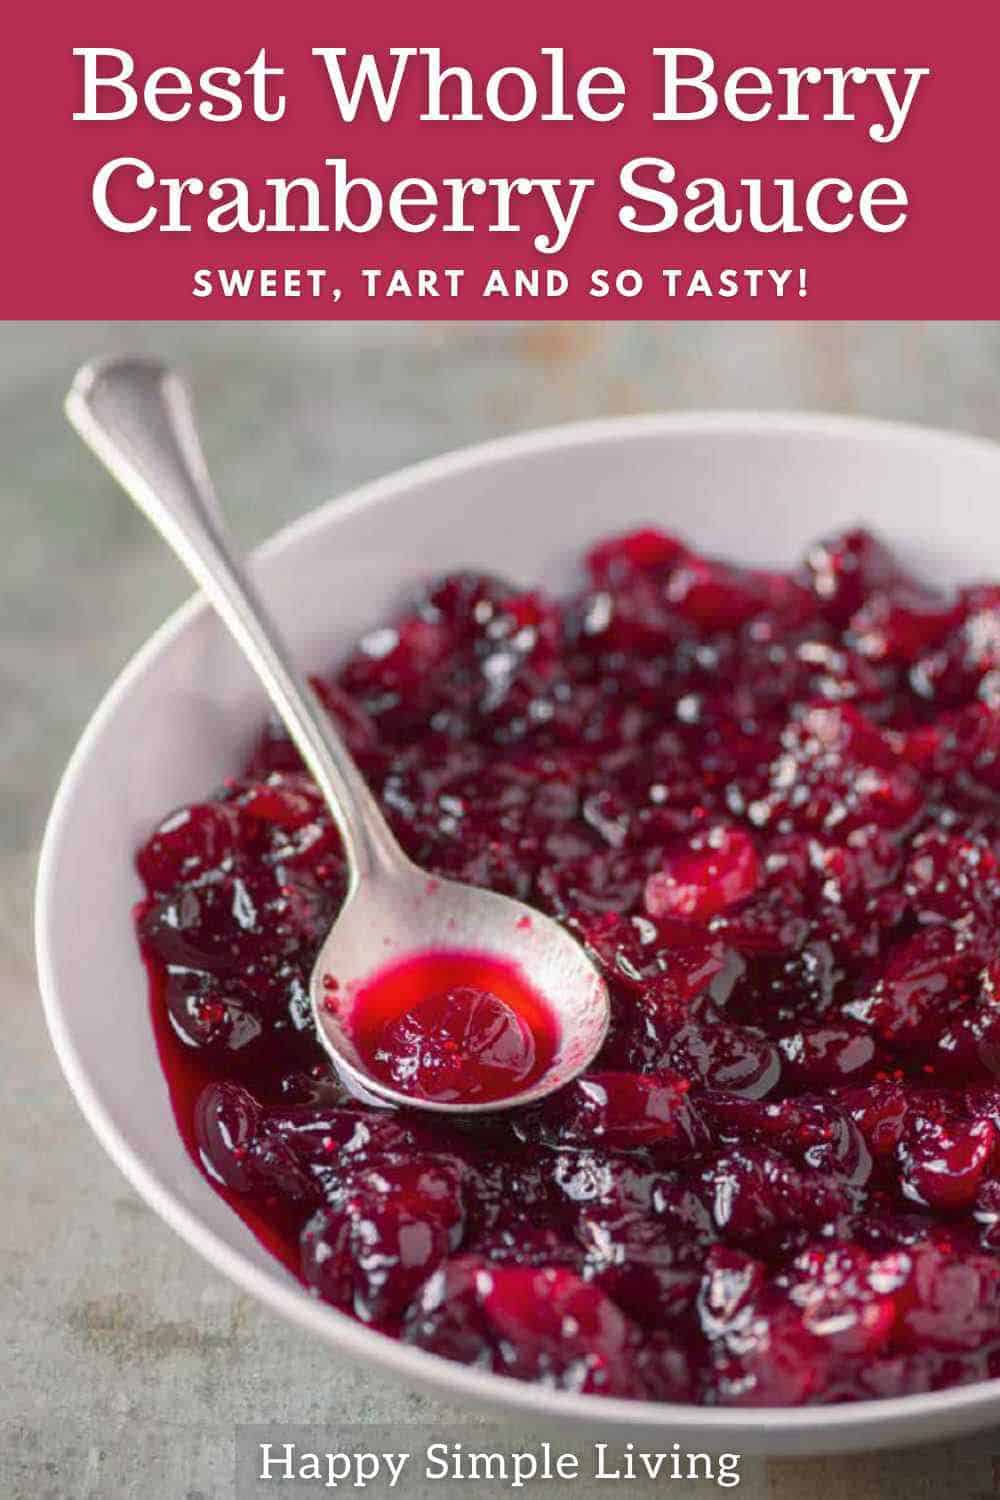 Cranberry sauce in a bowl with a serving spoon.